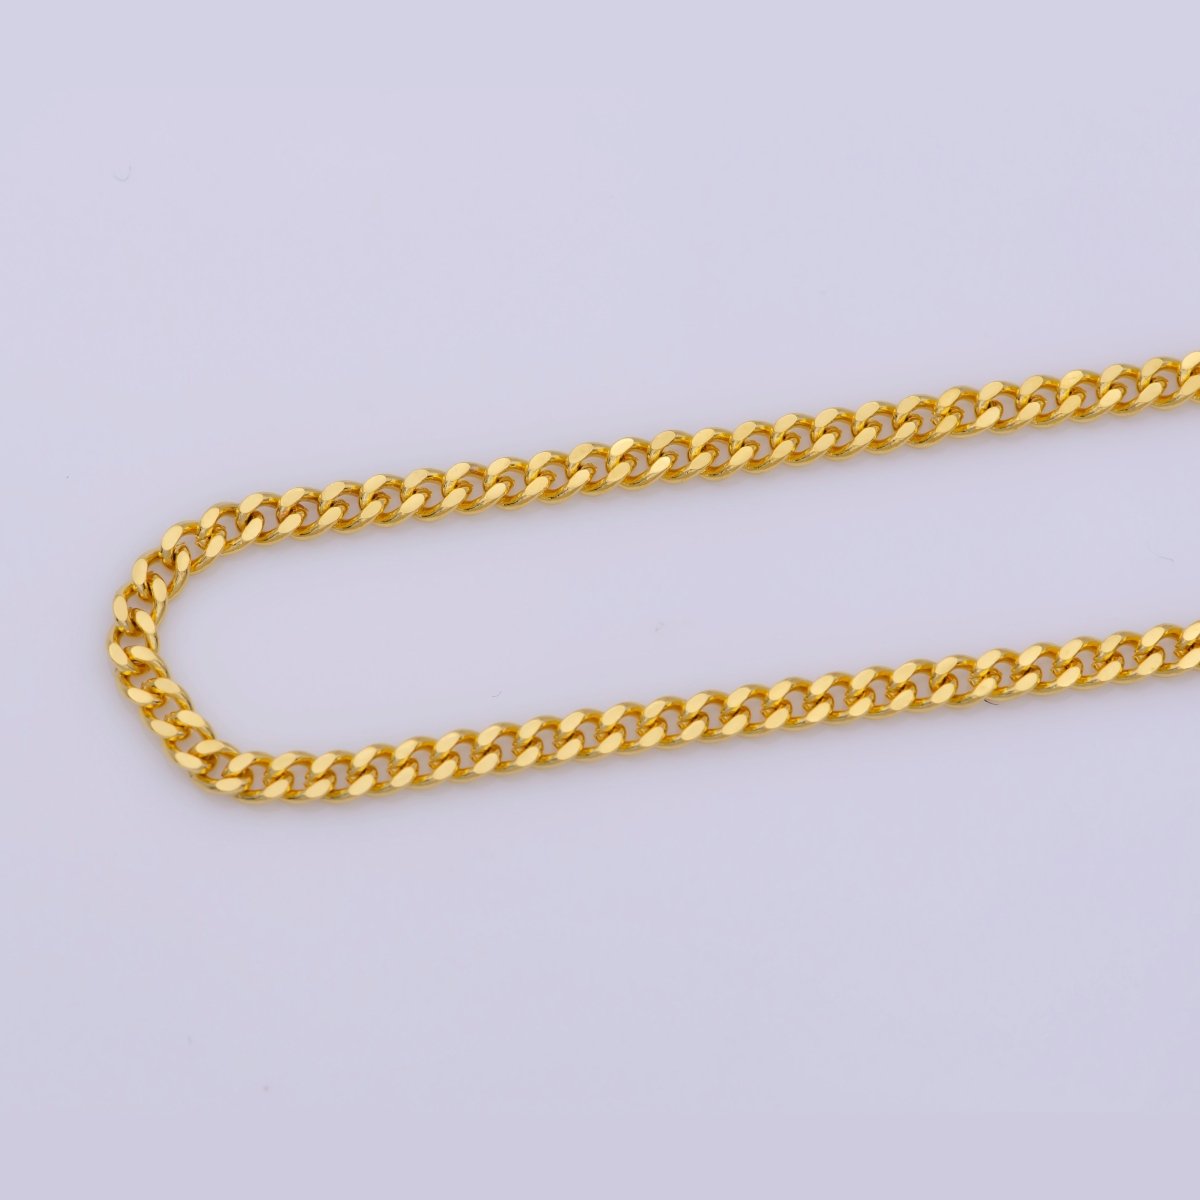 17.5 inch Curb Chain Necklace, 24K Gold Plated Curb Finished Chain For Necklace Jewelry Making, 3mm Width Curb Necklace w/ Lobster Clasps | CN-364 Clearance Pricing - DLUXCA